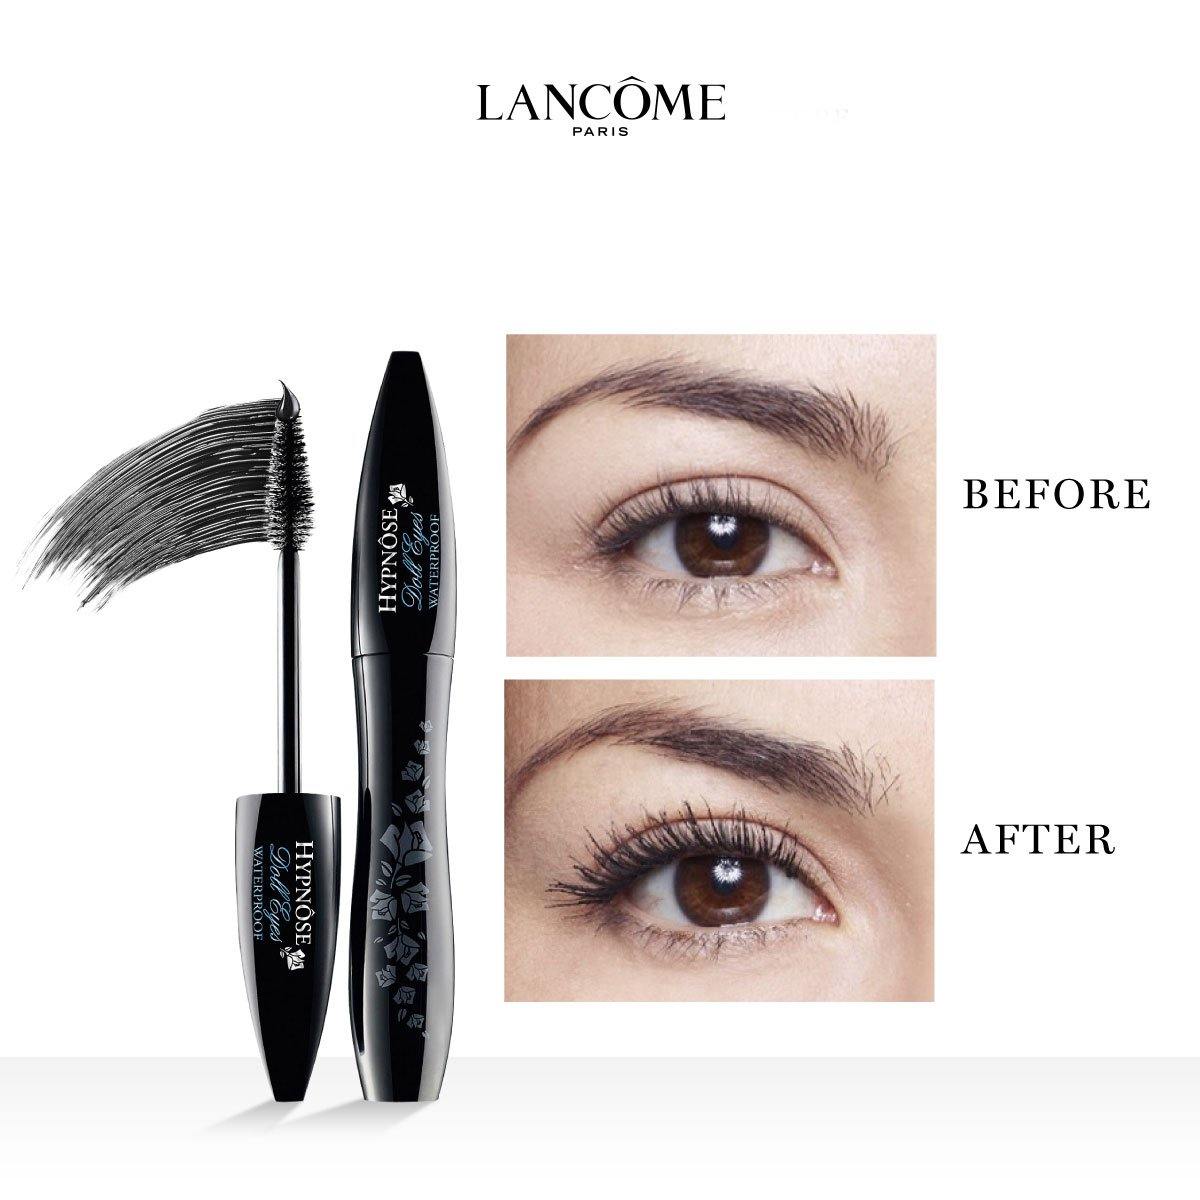 Lancome Hypnose Eyes Mascara - Volle wimpers! - Parfumerieshop.nl